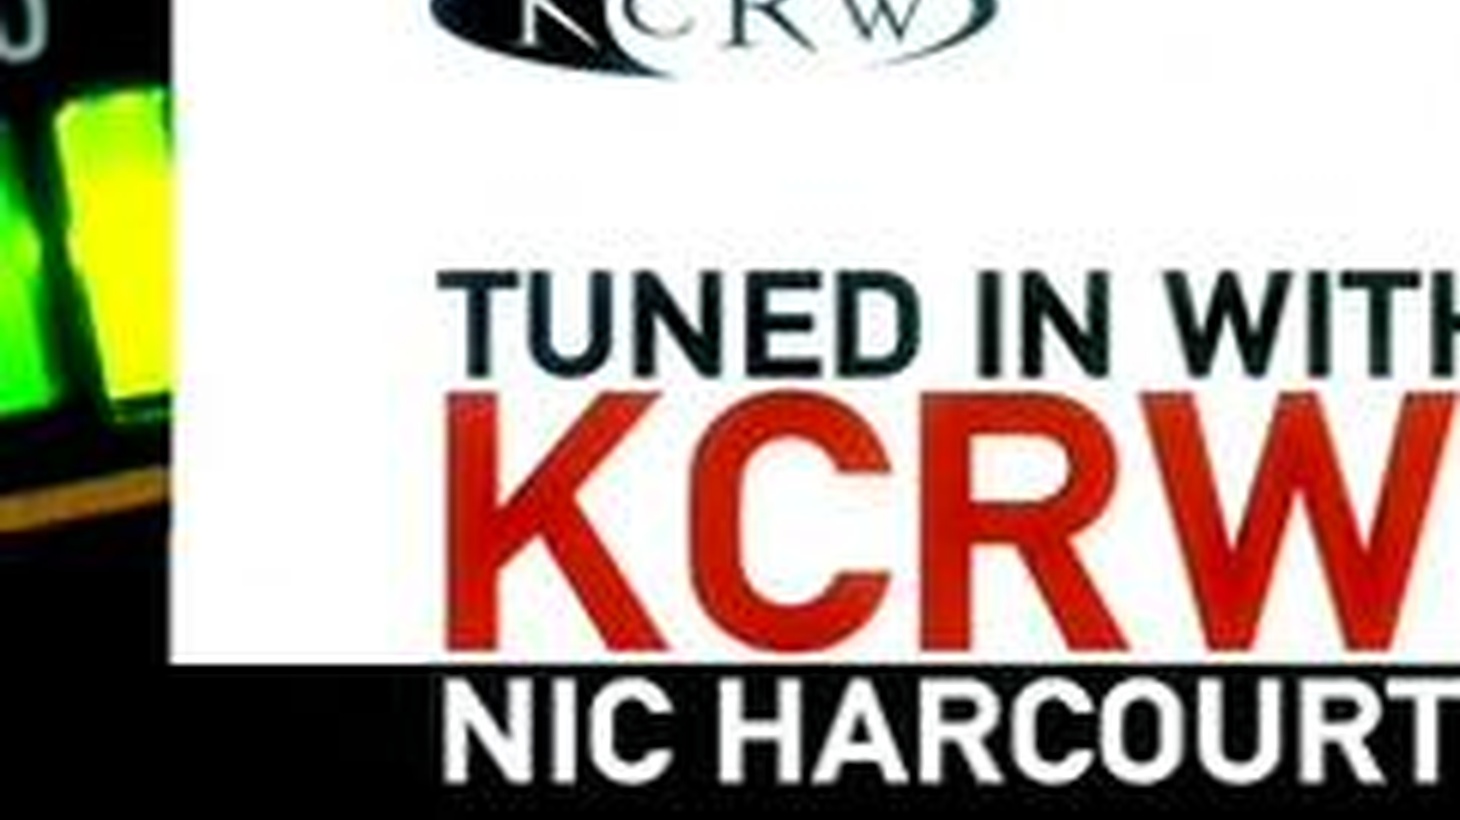 The latest episode of Tuned In With KCRW’s Nic Harcourt features Lisa Hannigan (“Ocean and a Rock” from SEA SEW), Conor Oberst (“Cape Canaveral” from his self-titled album), The Mostar Diving Club (“Honey Tree” from DON YOUR SUIT OF LIGHTS), and the Friendly Fires (“Paris” from their self-titled album). Download this video as well as daily free music tracks at http://www.KCRW.com.